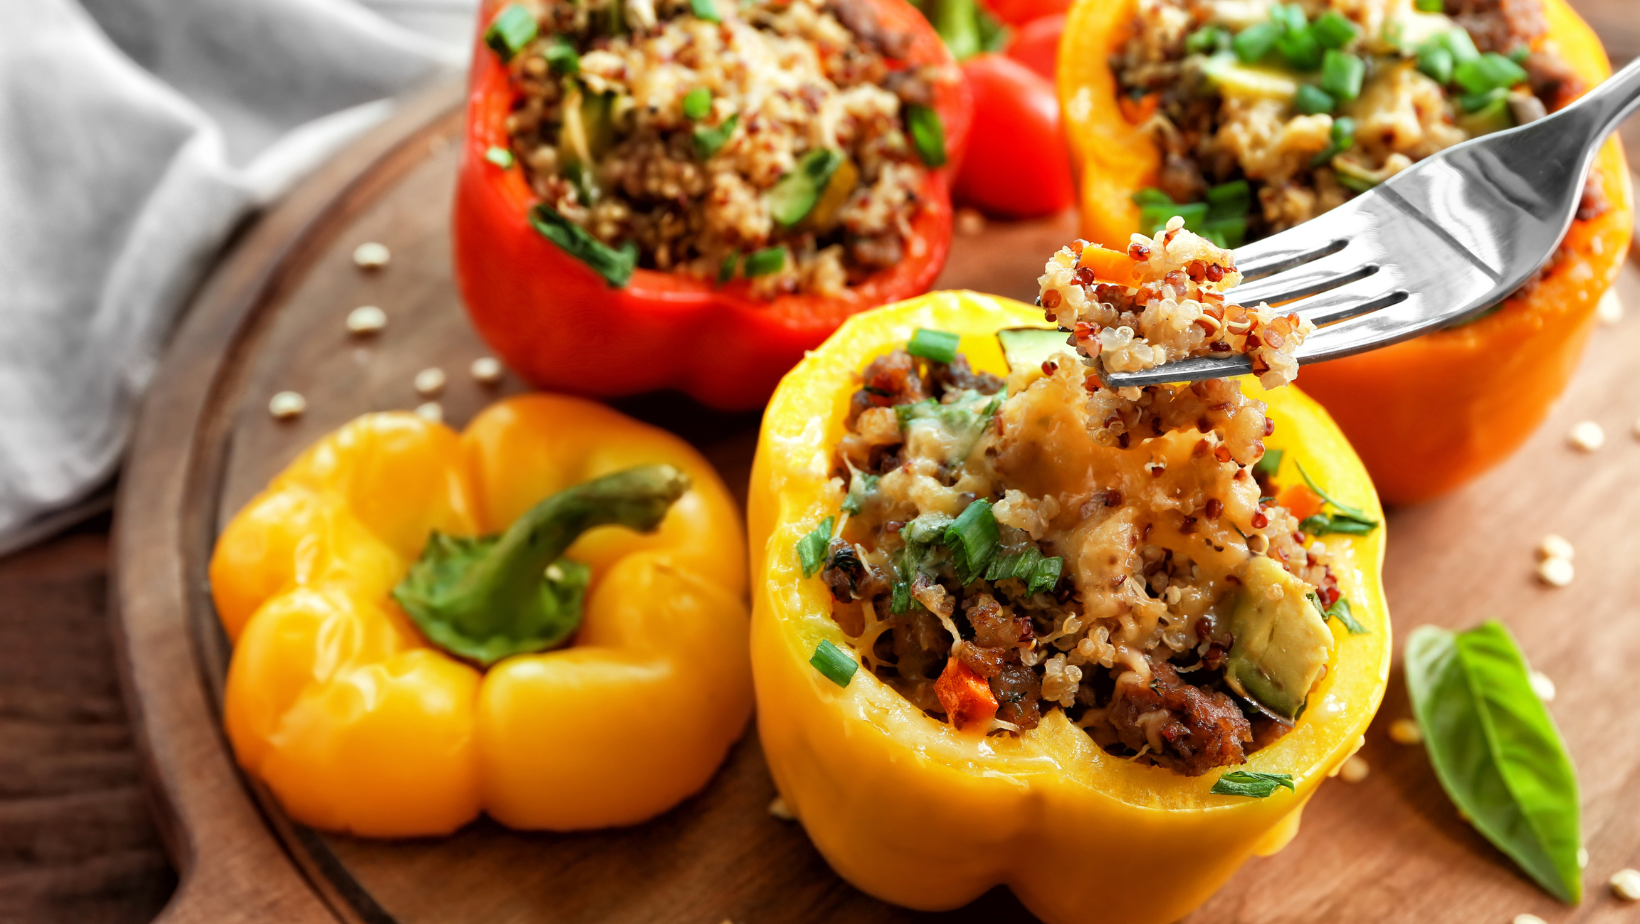 Eating of quinoa stuffed pepper on wooden board